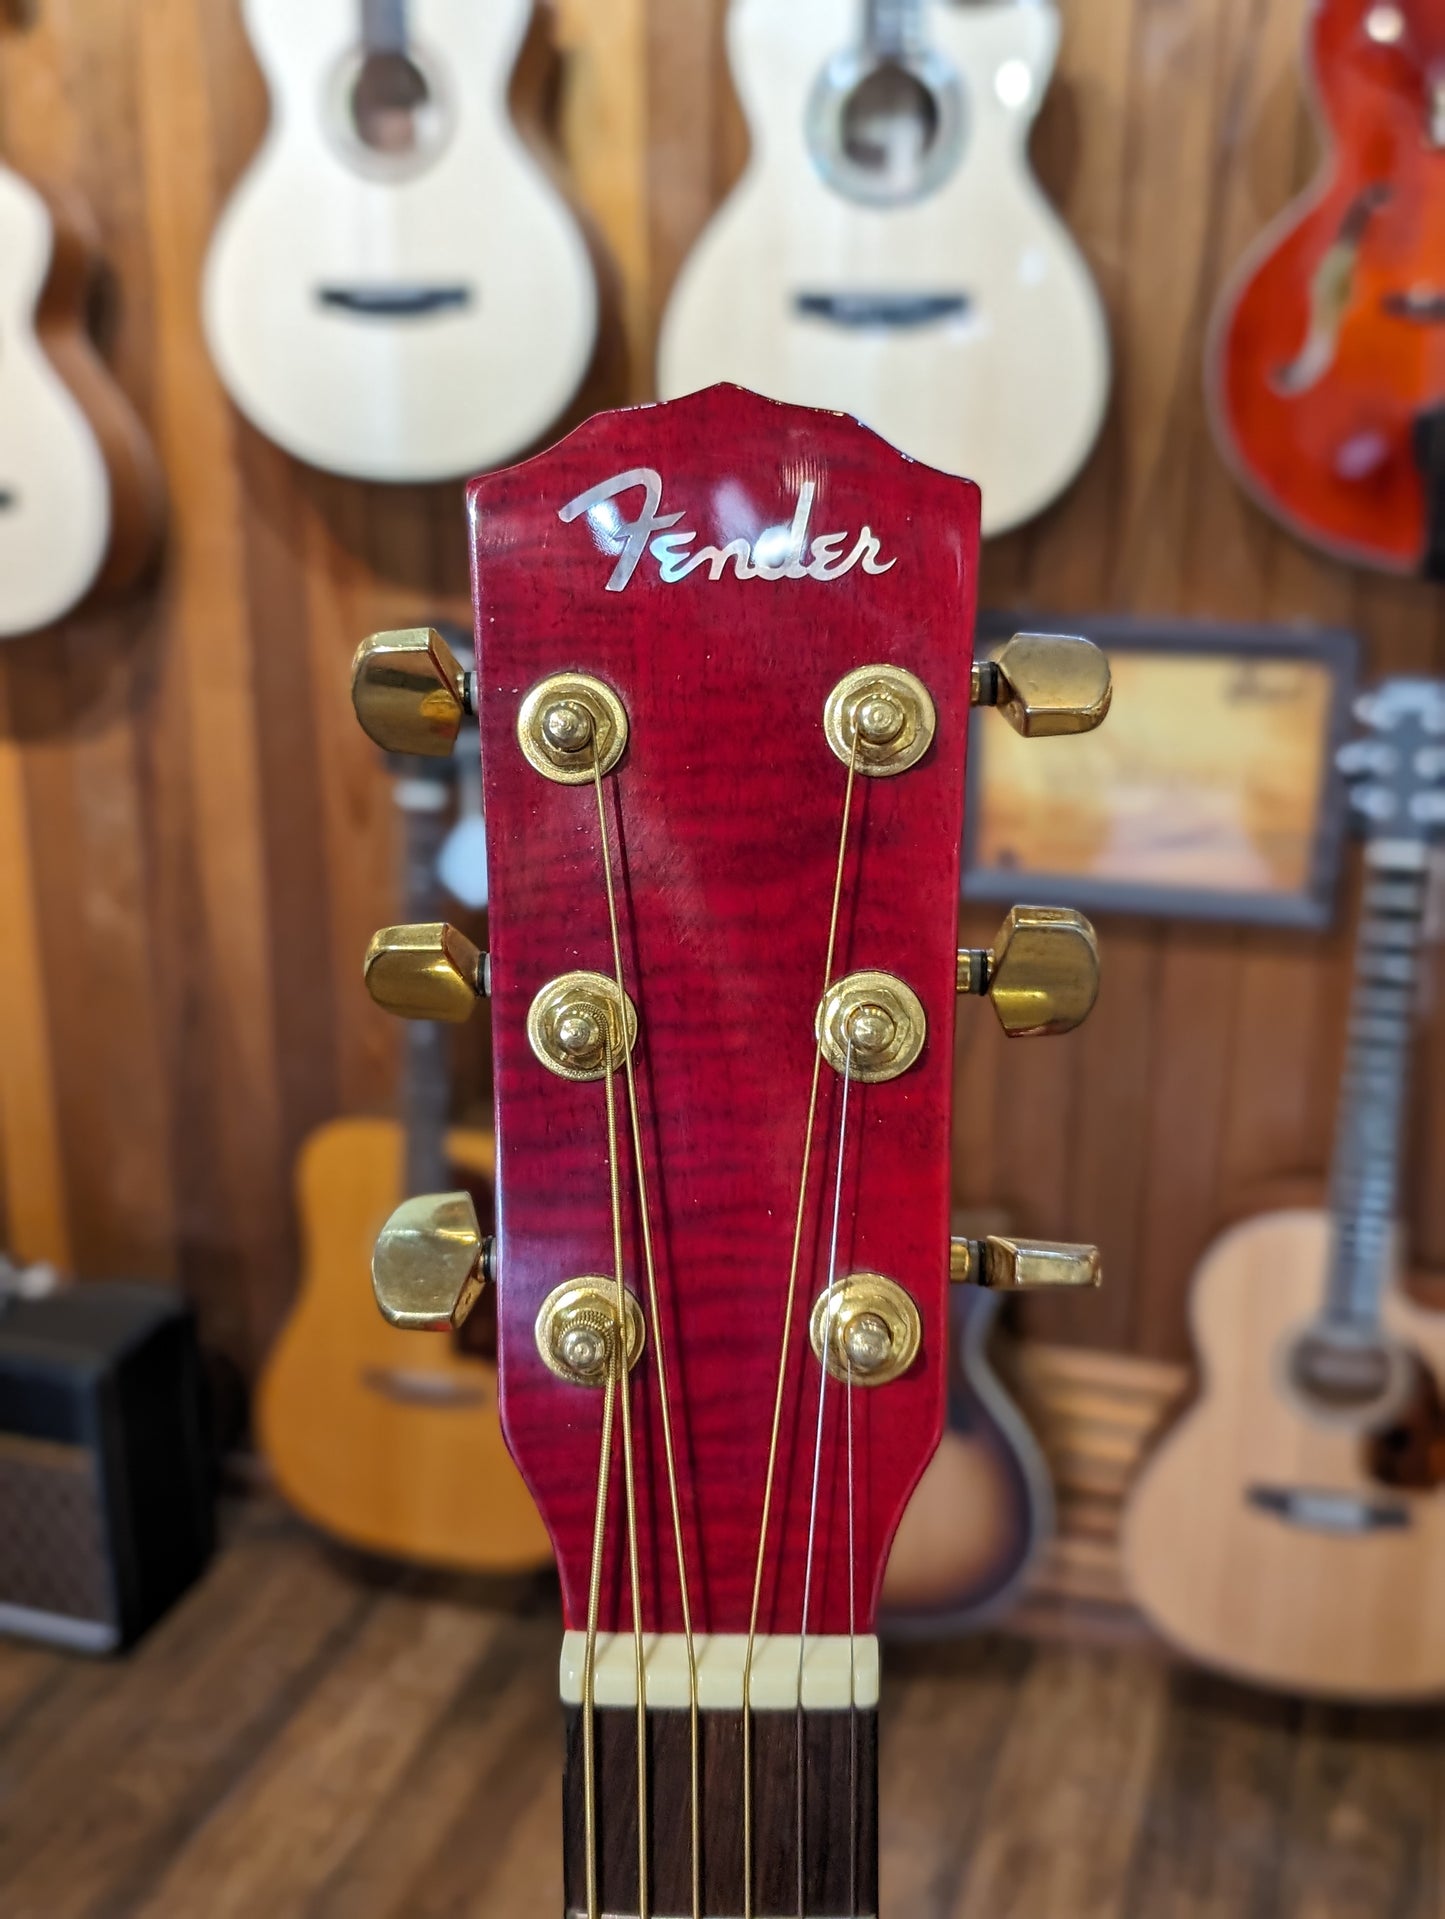 Fender DG22CE Acoustic/Electric Guitar - Cherry (Used)